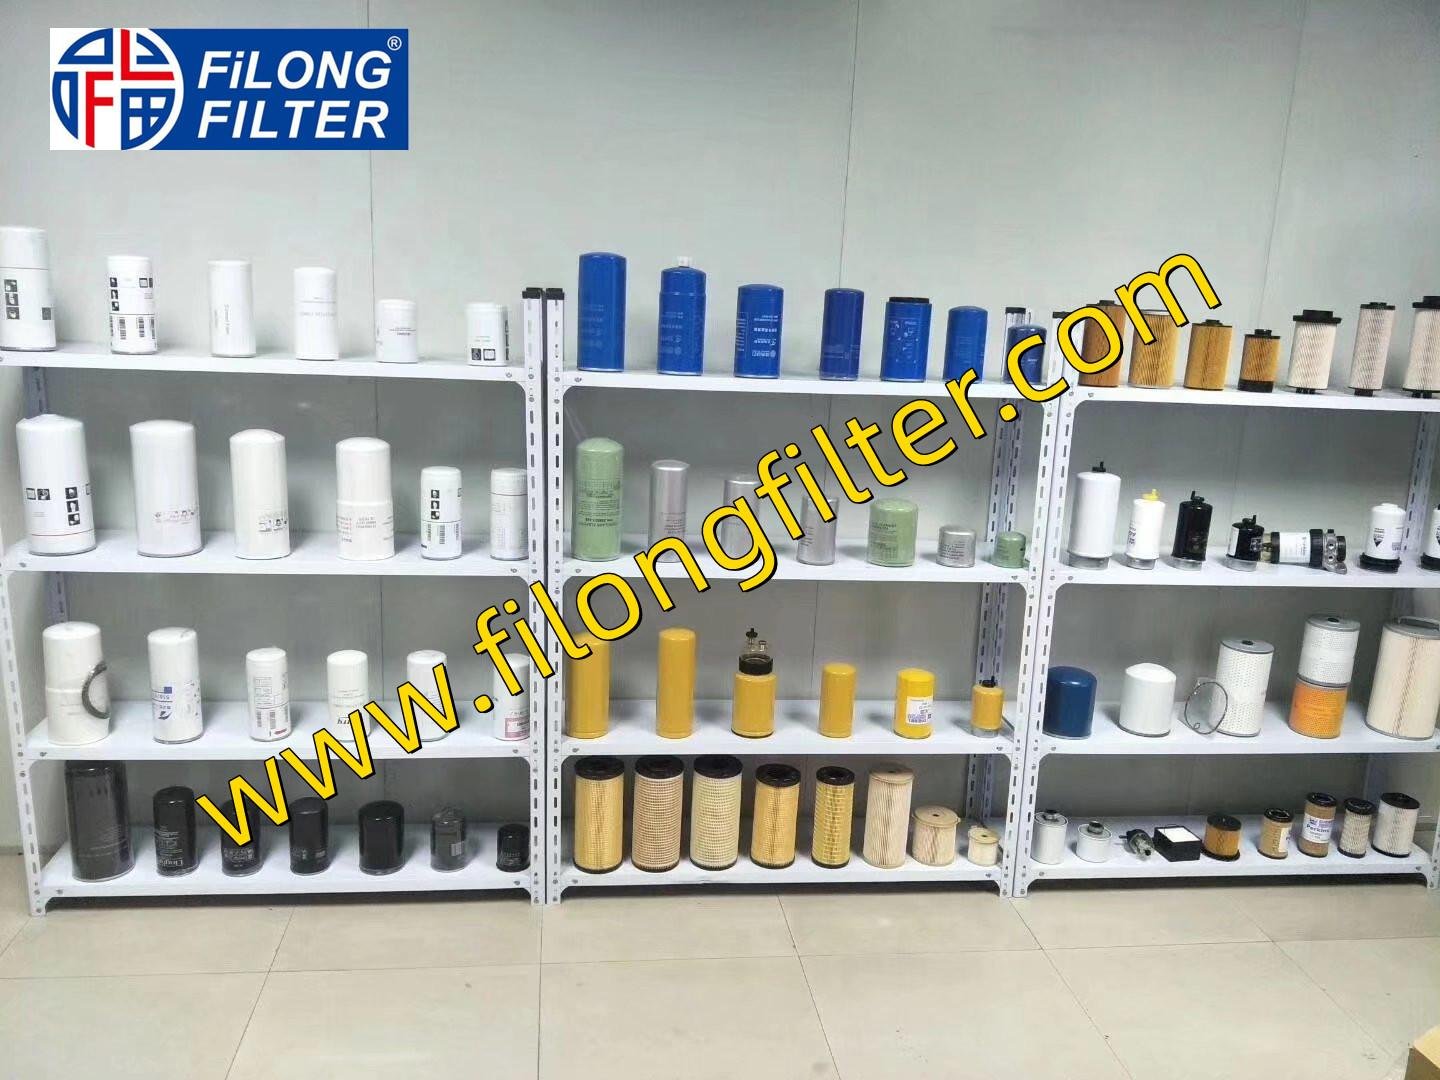  FILONG hydraulic filter Manufacturers in China,  FILONG truck filters manufactory in china ,  FILONG hydraulic filter manufactory in china ,  FILONG truck parts supplier in china,  FILONG truck Oil Filter Manufacturers In China , FILONG oil filters manufactory in china, FILONG Oil Filter Supplier In China,auto filters manufactory in china, FILONG automotive filters manufactory in china,China  FILONG Oil filter supplier , FILONG auto filter Manufacturers In China, FILONG auto filter  Supplier In China,Car Air Filter Suppliers In China ,FILONG Air Filters manufactory in china ,,Air Filters factory in china, automobile filters manufactory in china,China air filter supplier,